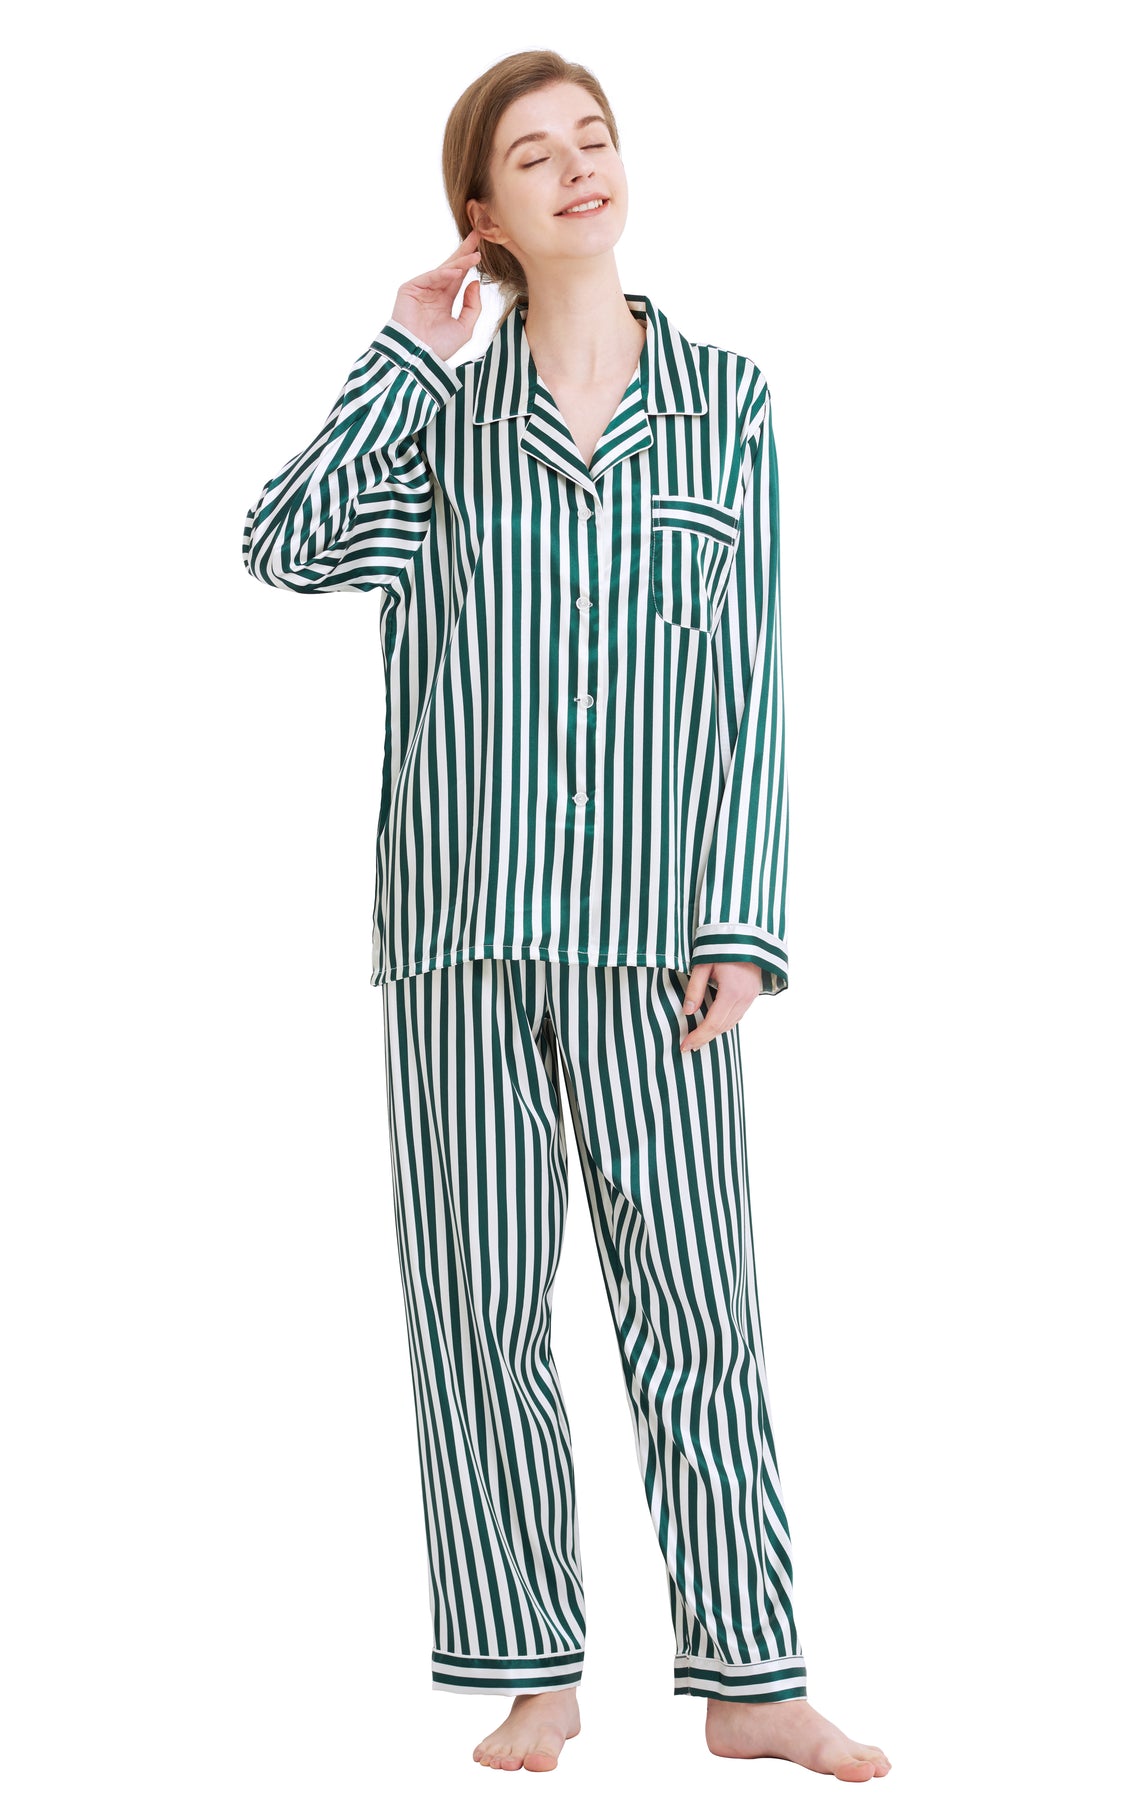 Womens Silk Satin Pajama Set Long Sleeve Green And White Striped Tony And Candice 